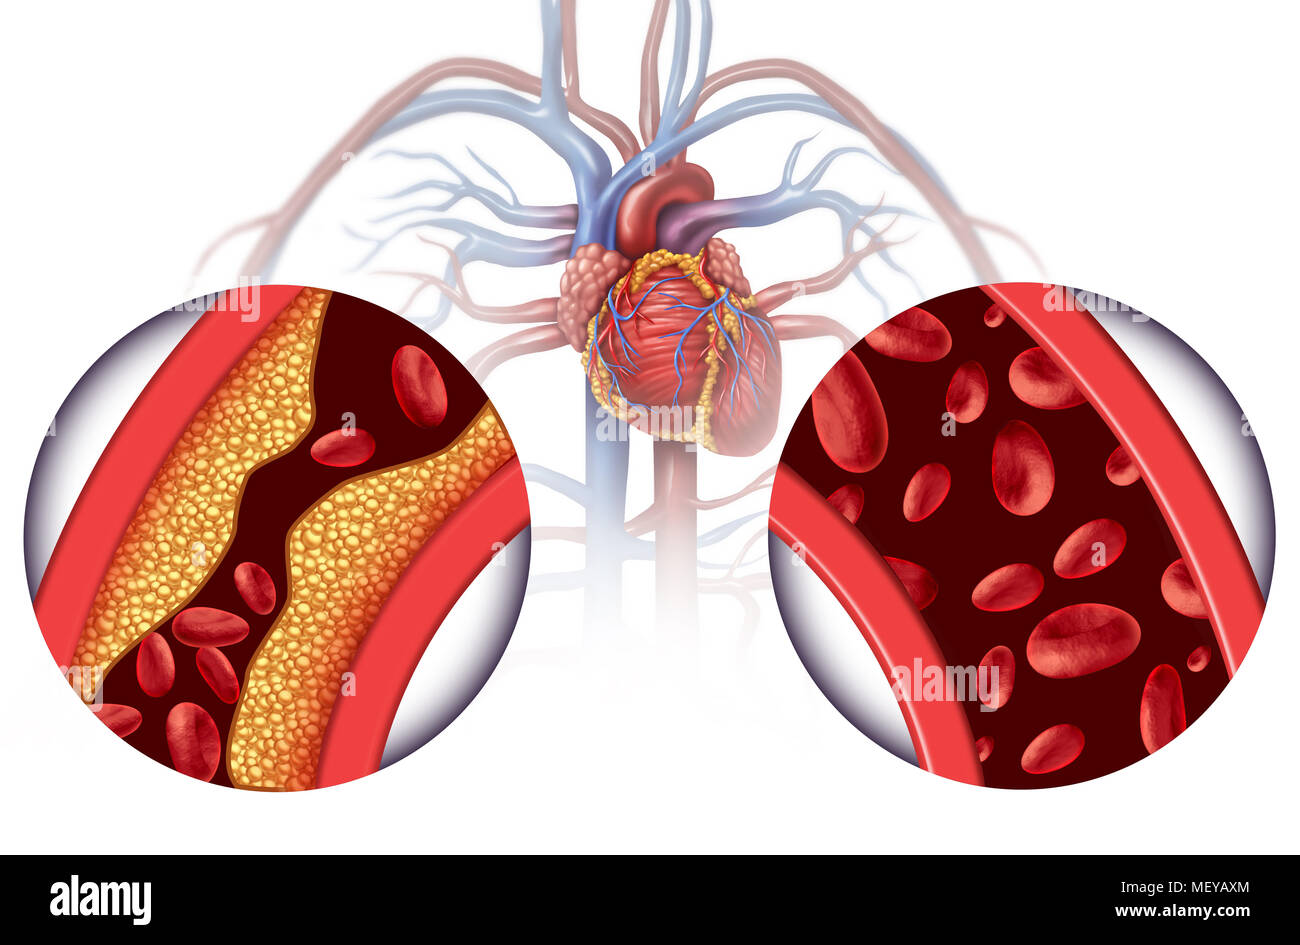 Chelation therapy and heart disease treatment concept as an alternative medicine for human blood circulation disease with 3D illustration elements. Stock Photo